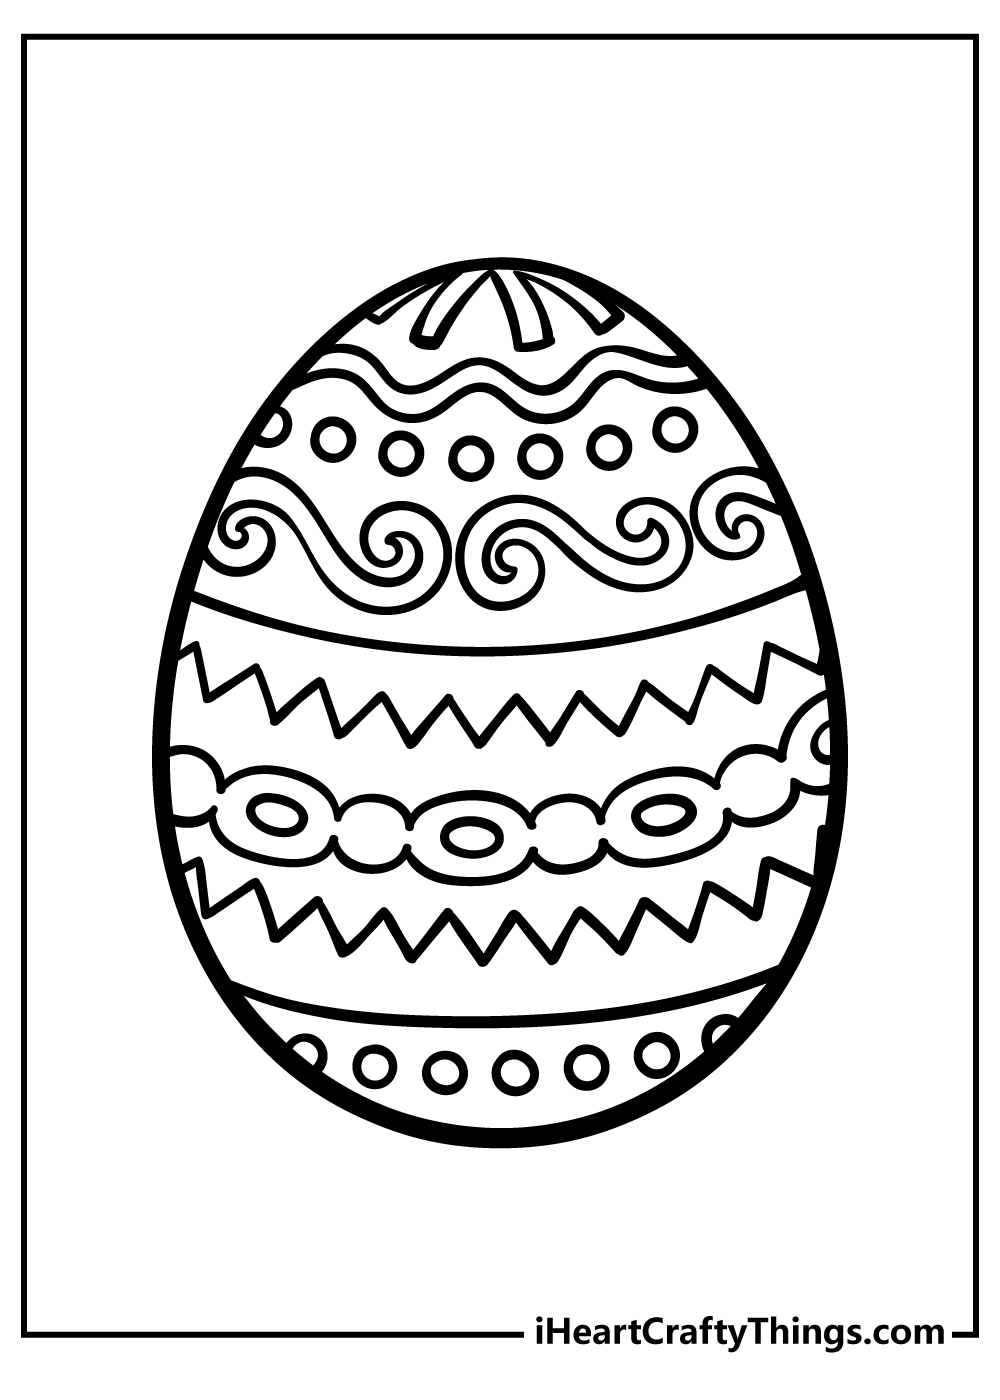 20 Festive Easter Egg Coloring Pages Updated 20